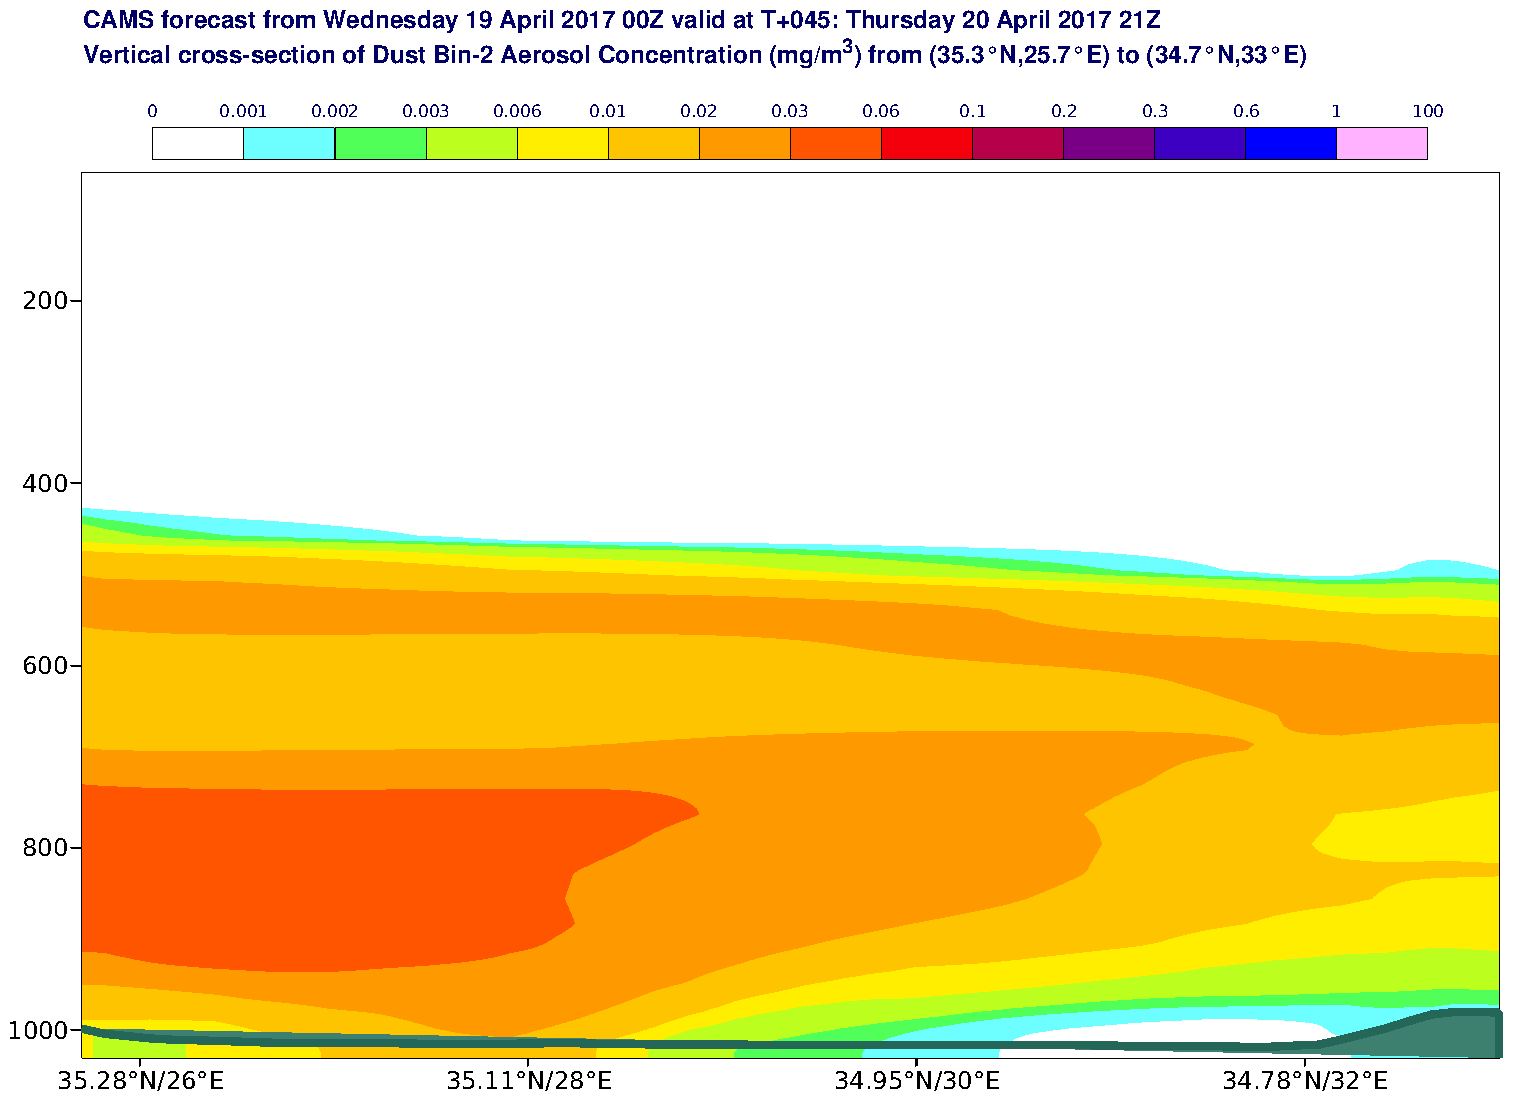 Vertical cross-section of Dust Bin-2 Aerosol Concentration (mg/m3) valid at T45 - 2017-04-20 21:00